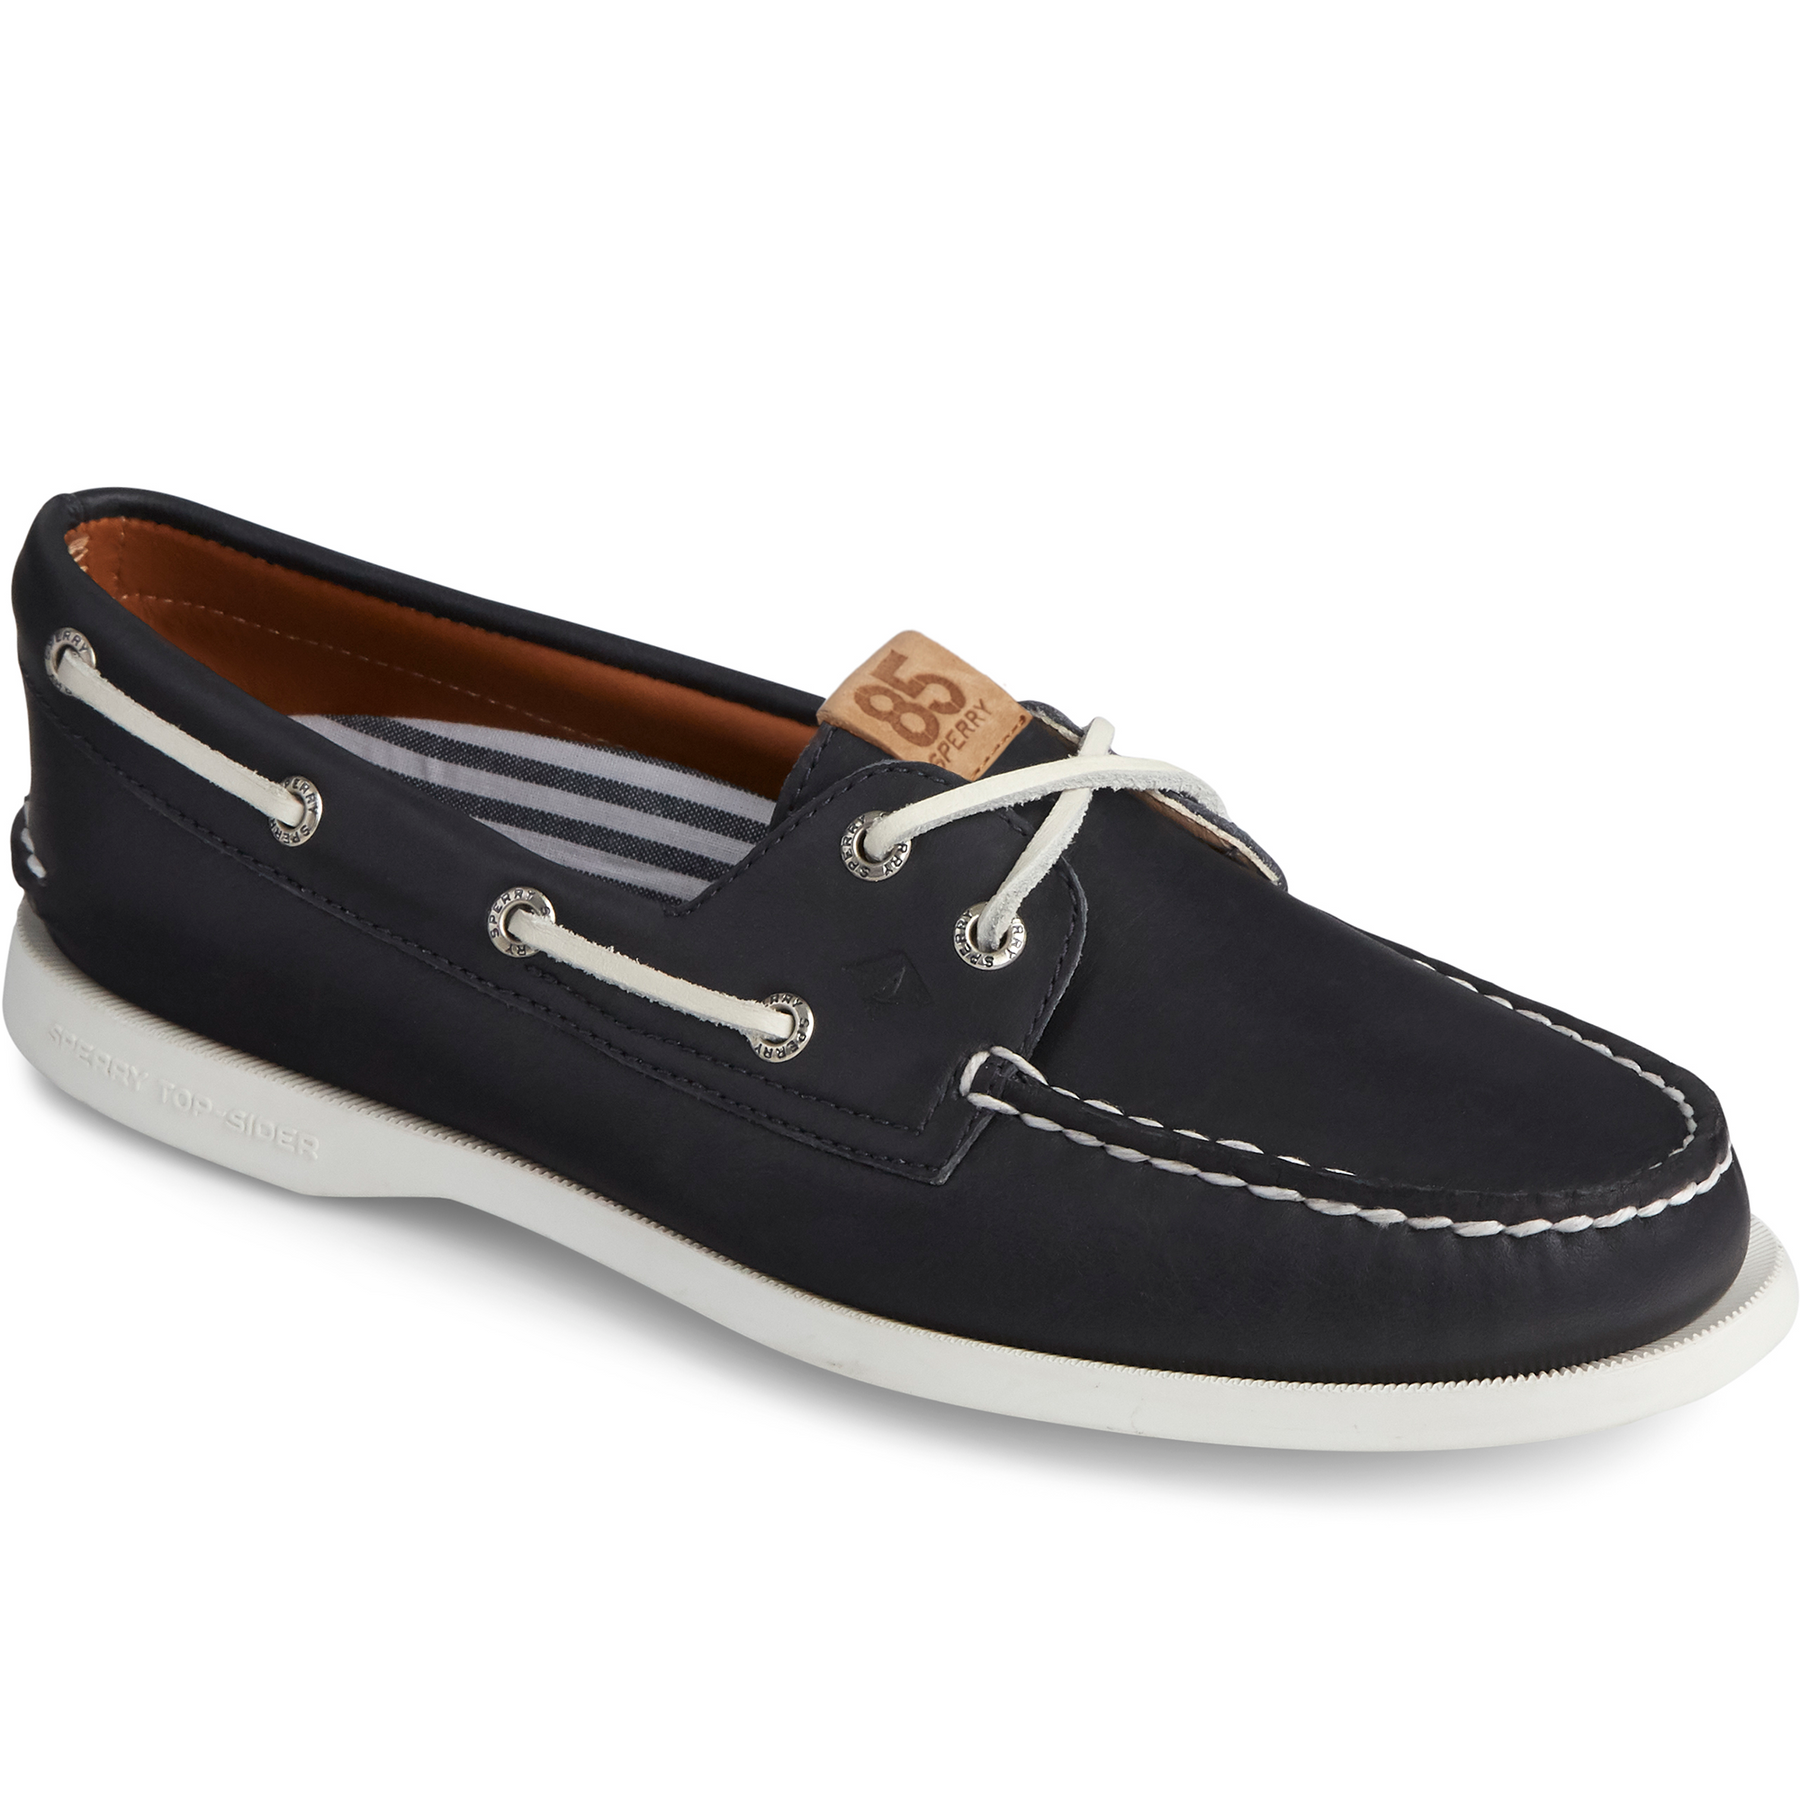 Women's Authentic Original 85th Anniversary Navy Boat Shoe (STS85298)